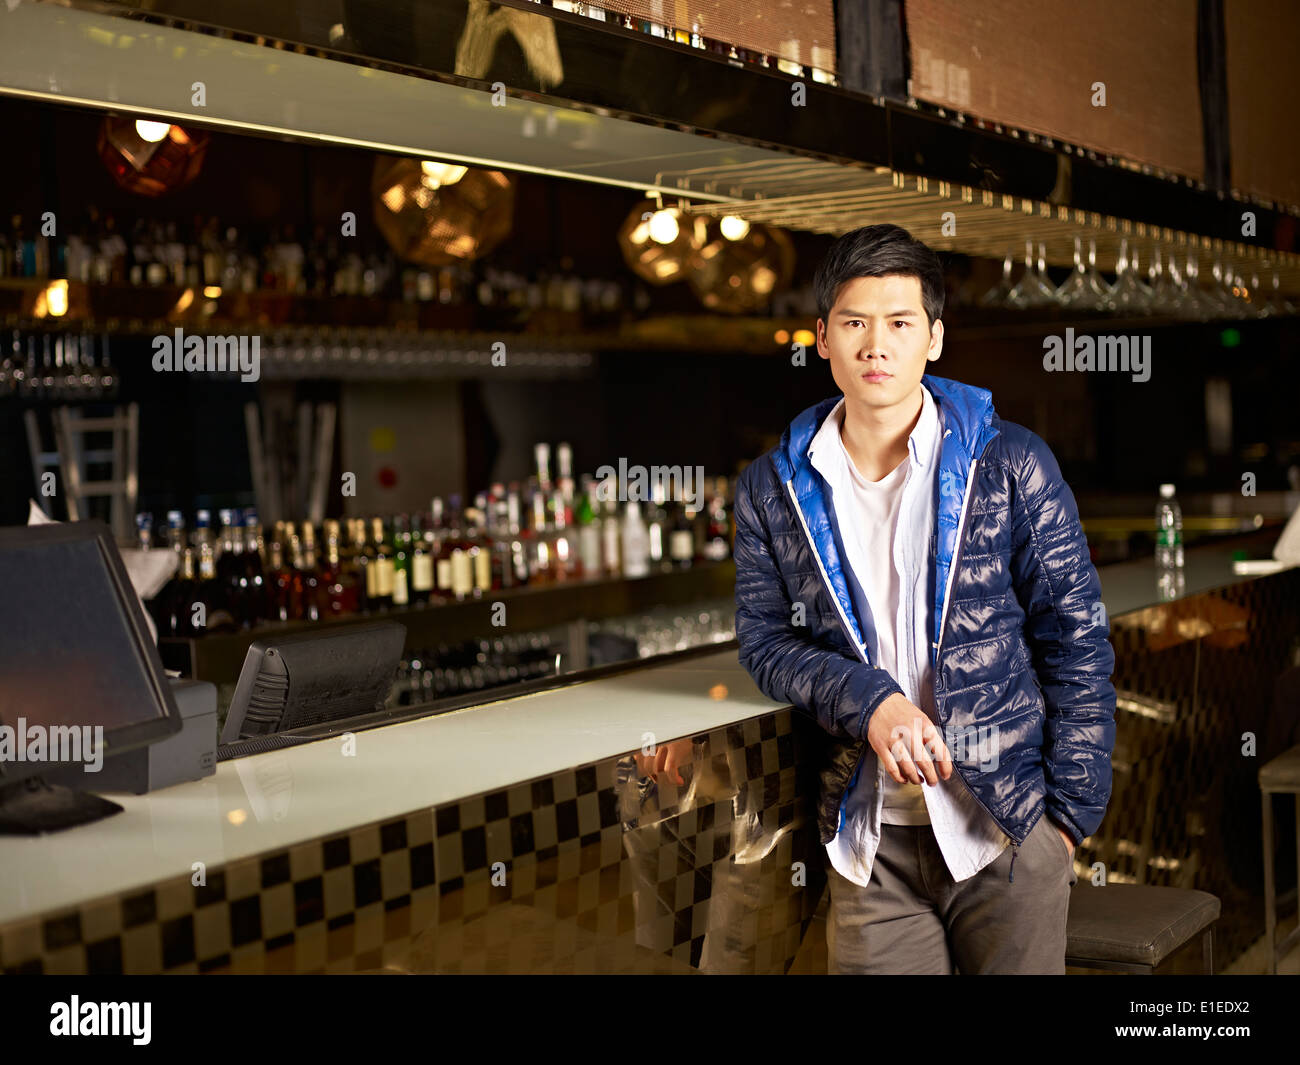 young man in pub Stock Photo